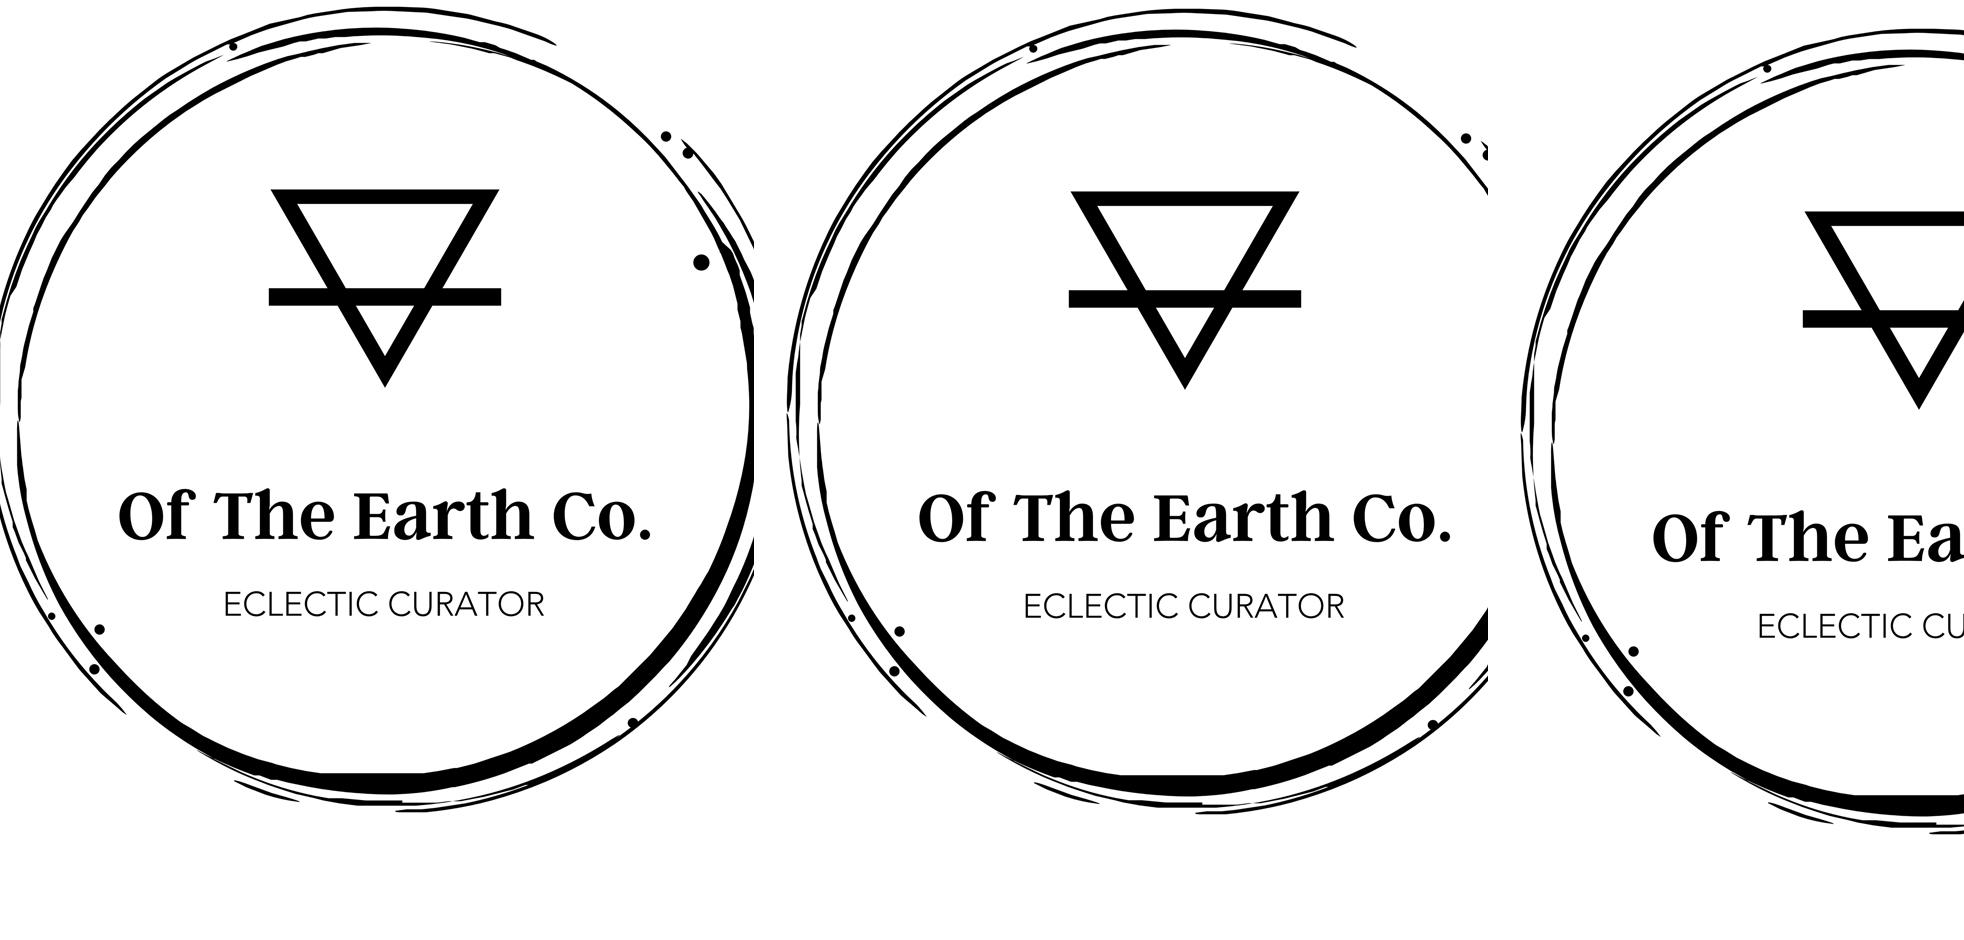 Of The Earth Co.